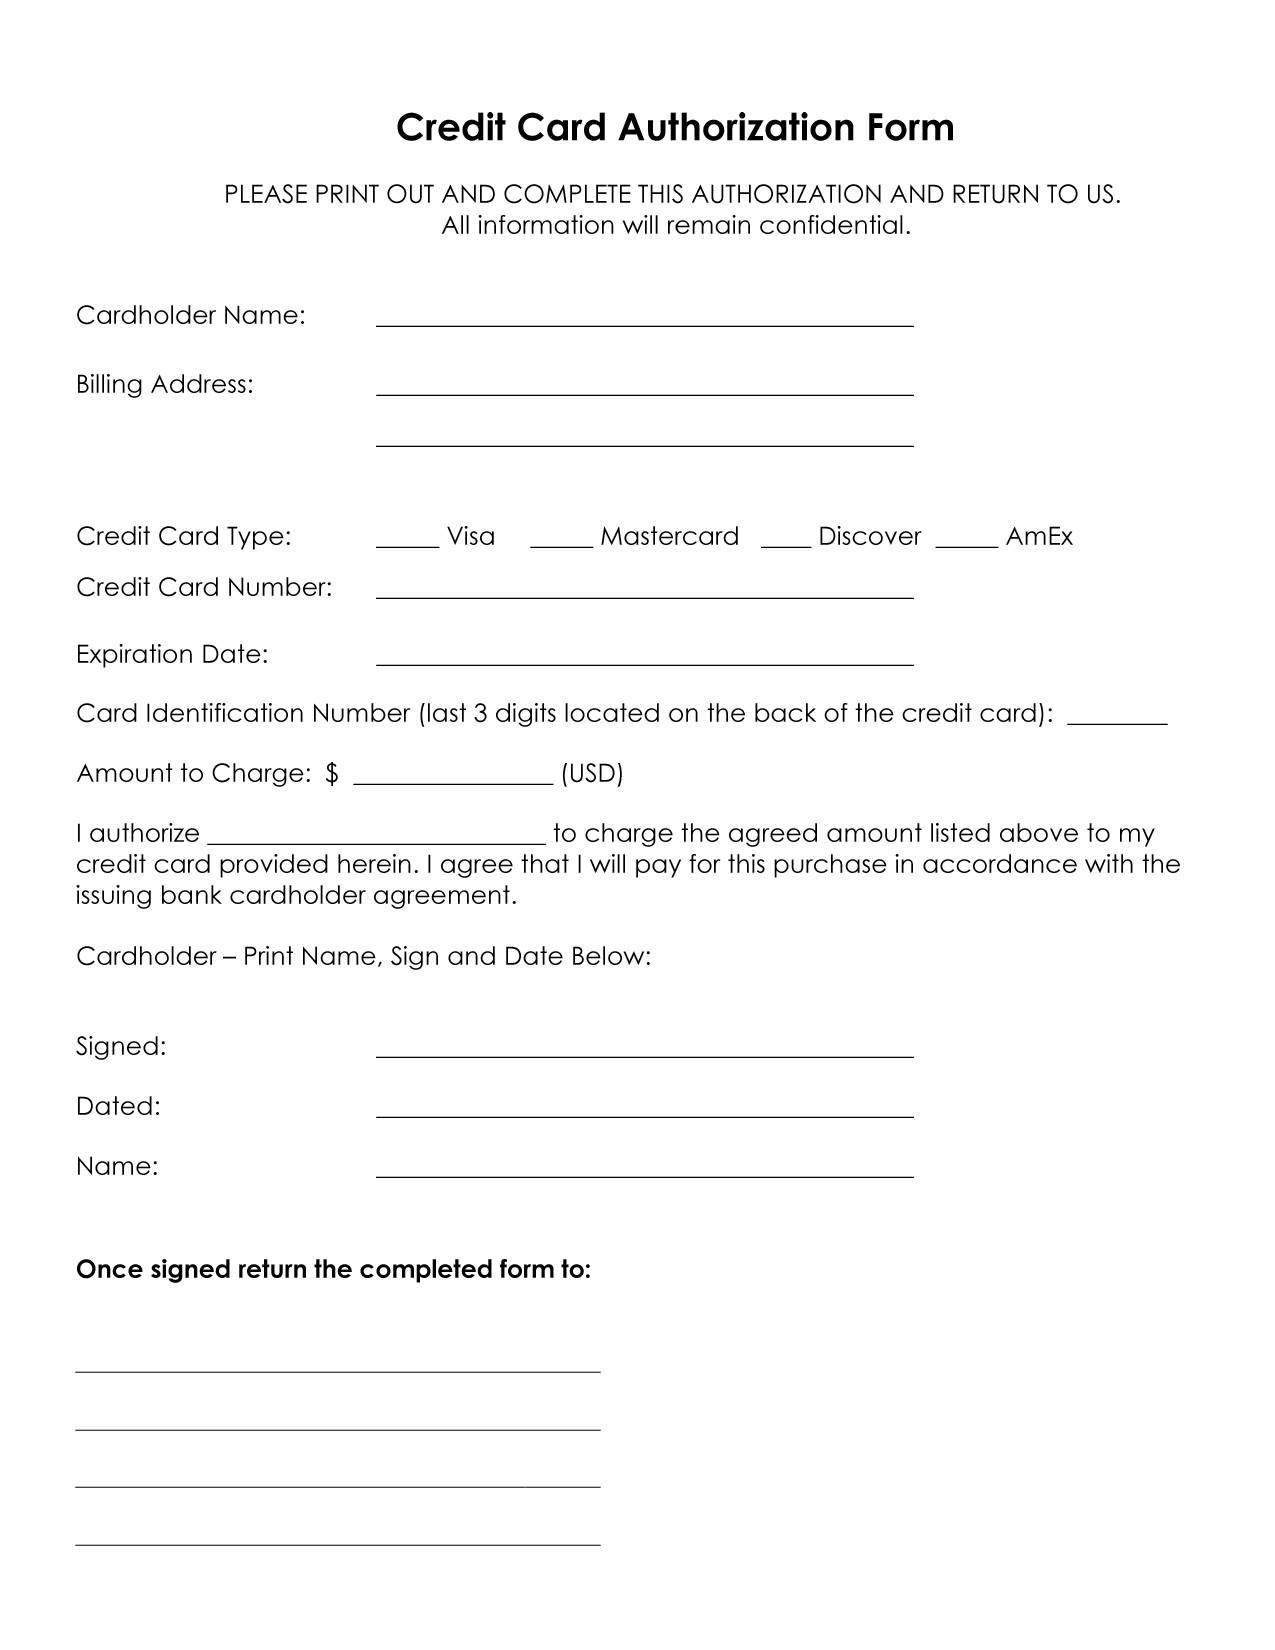 Credit Card Authorization Form Template In 2020 | Credit Throughout Order Form With Credit Card Template